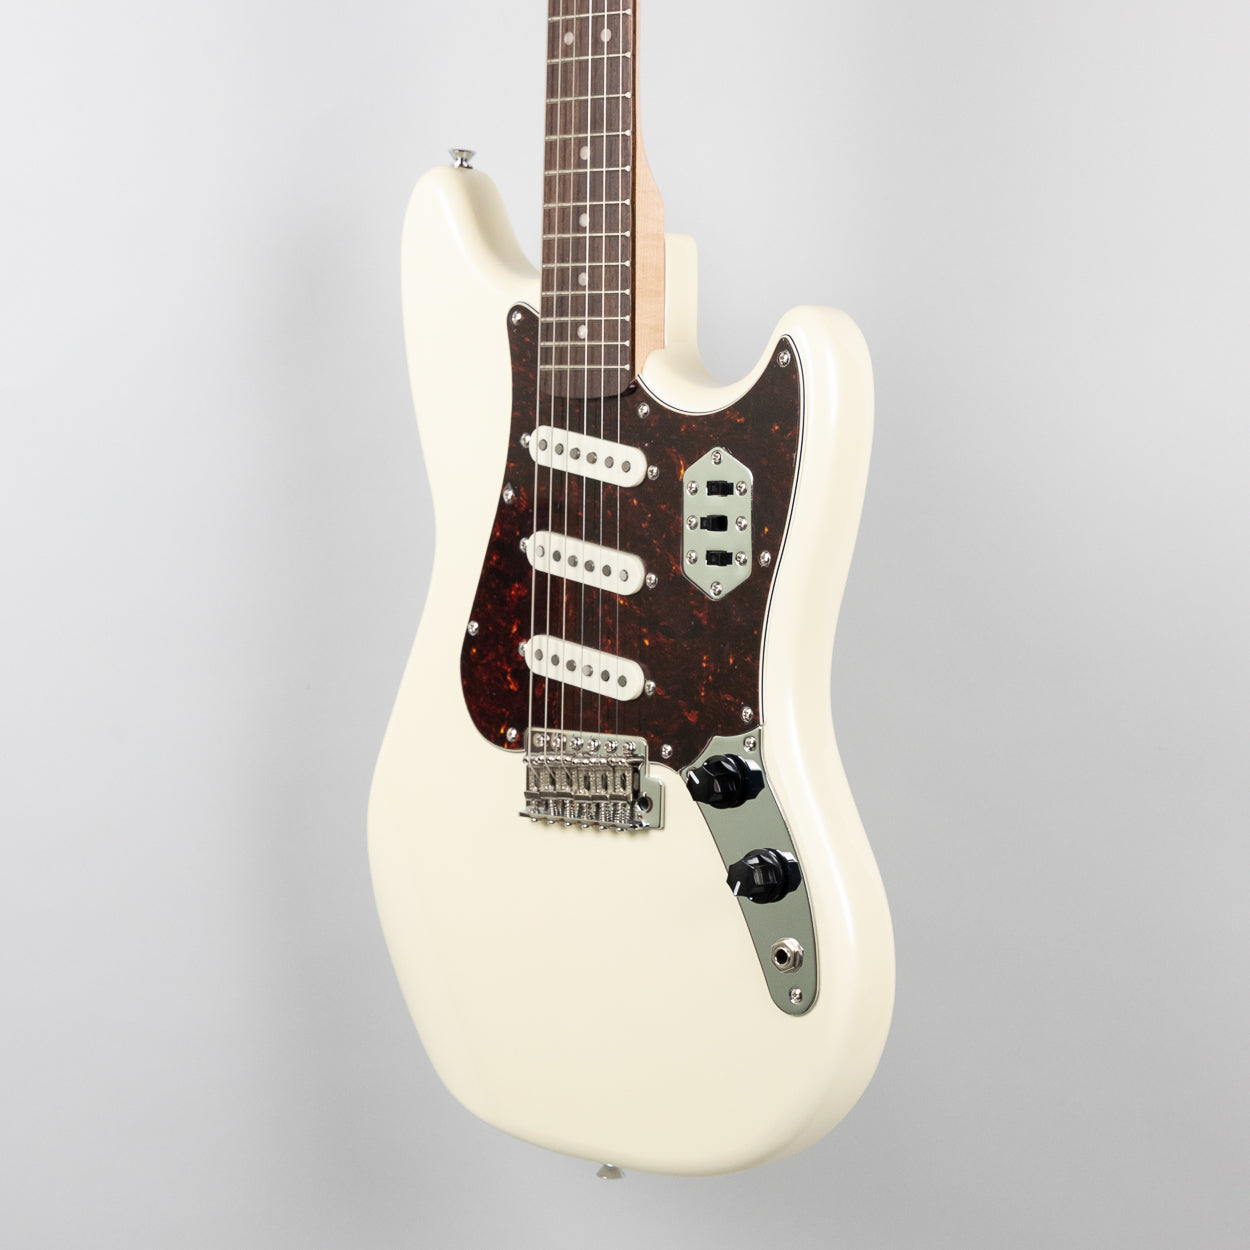 Squier Paranormal Cyclone in Pearl White